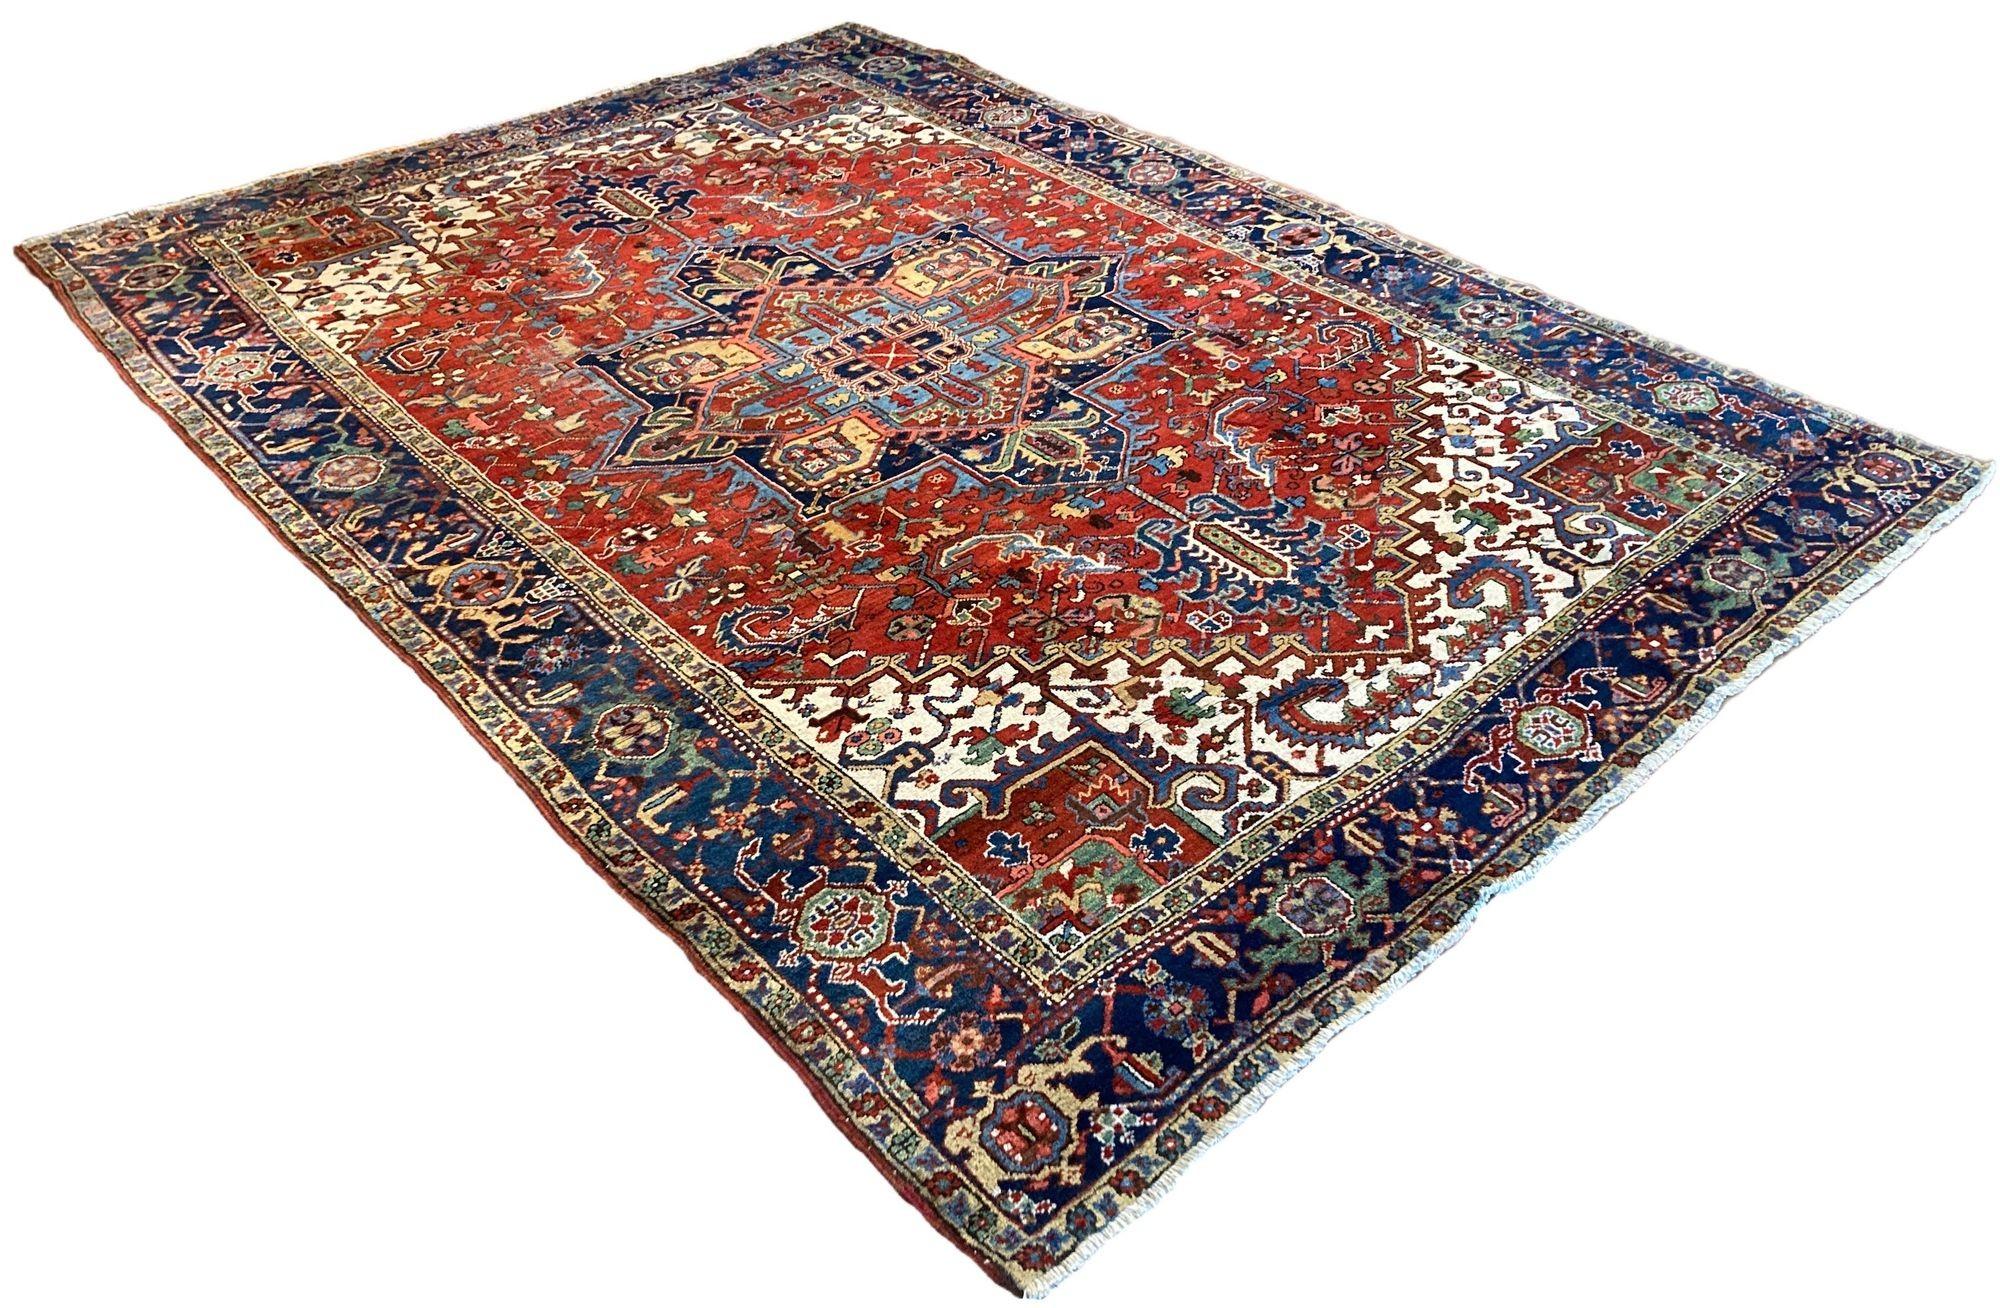 Antique Heriz Carpet 3.37m x 2.42m In Good Condition For Sale In St. Albans, GB